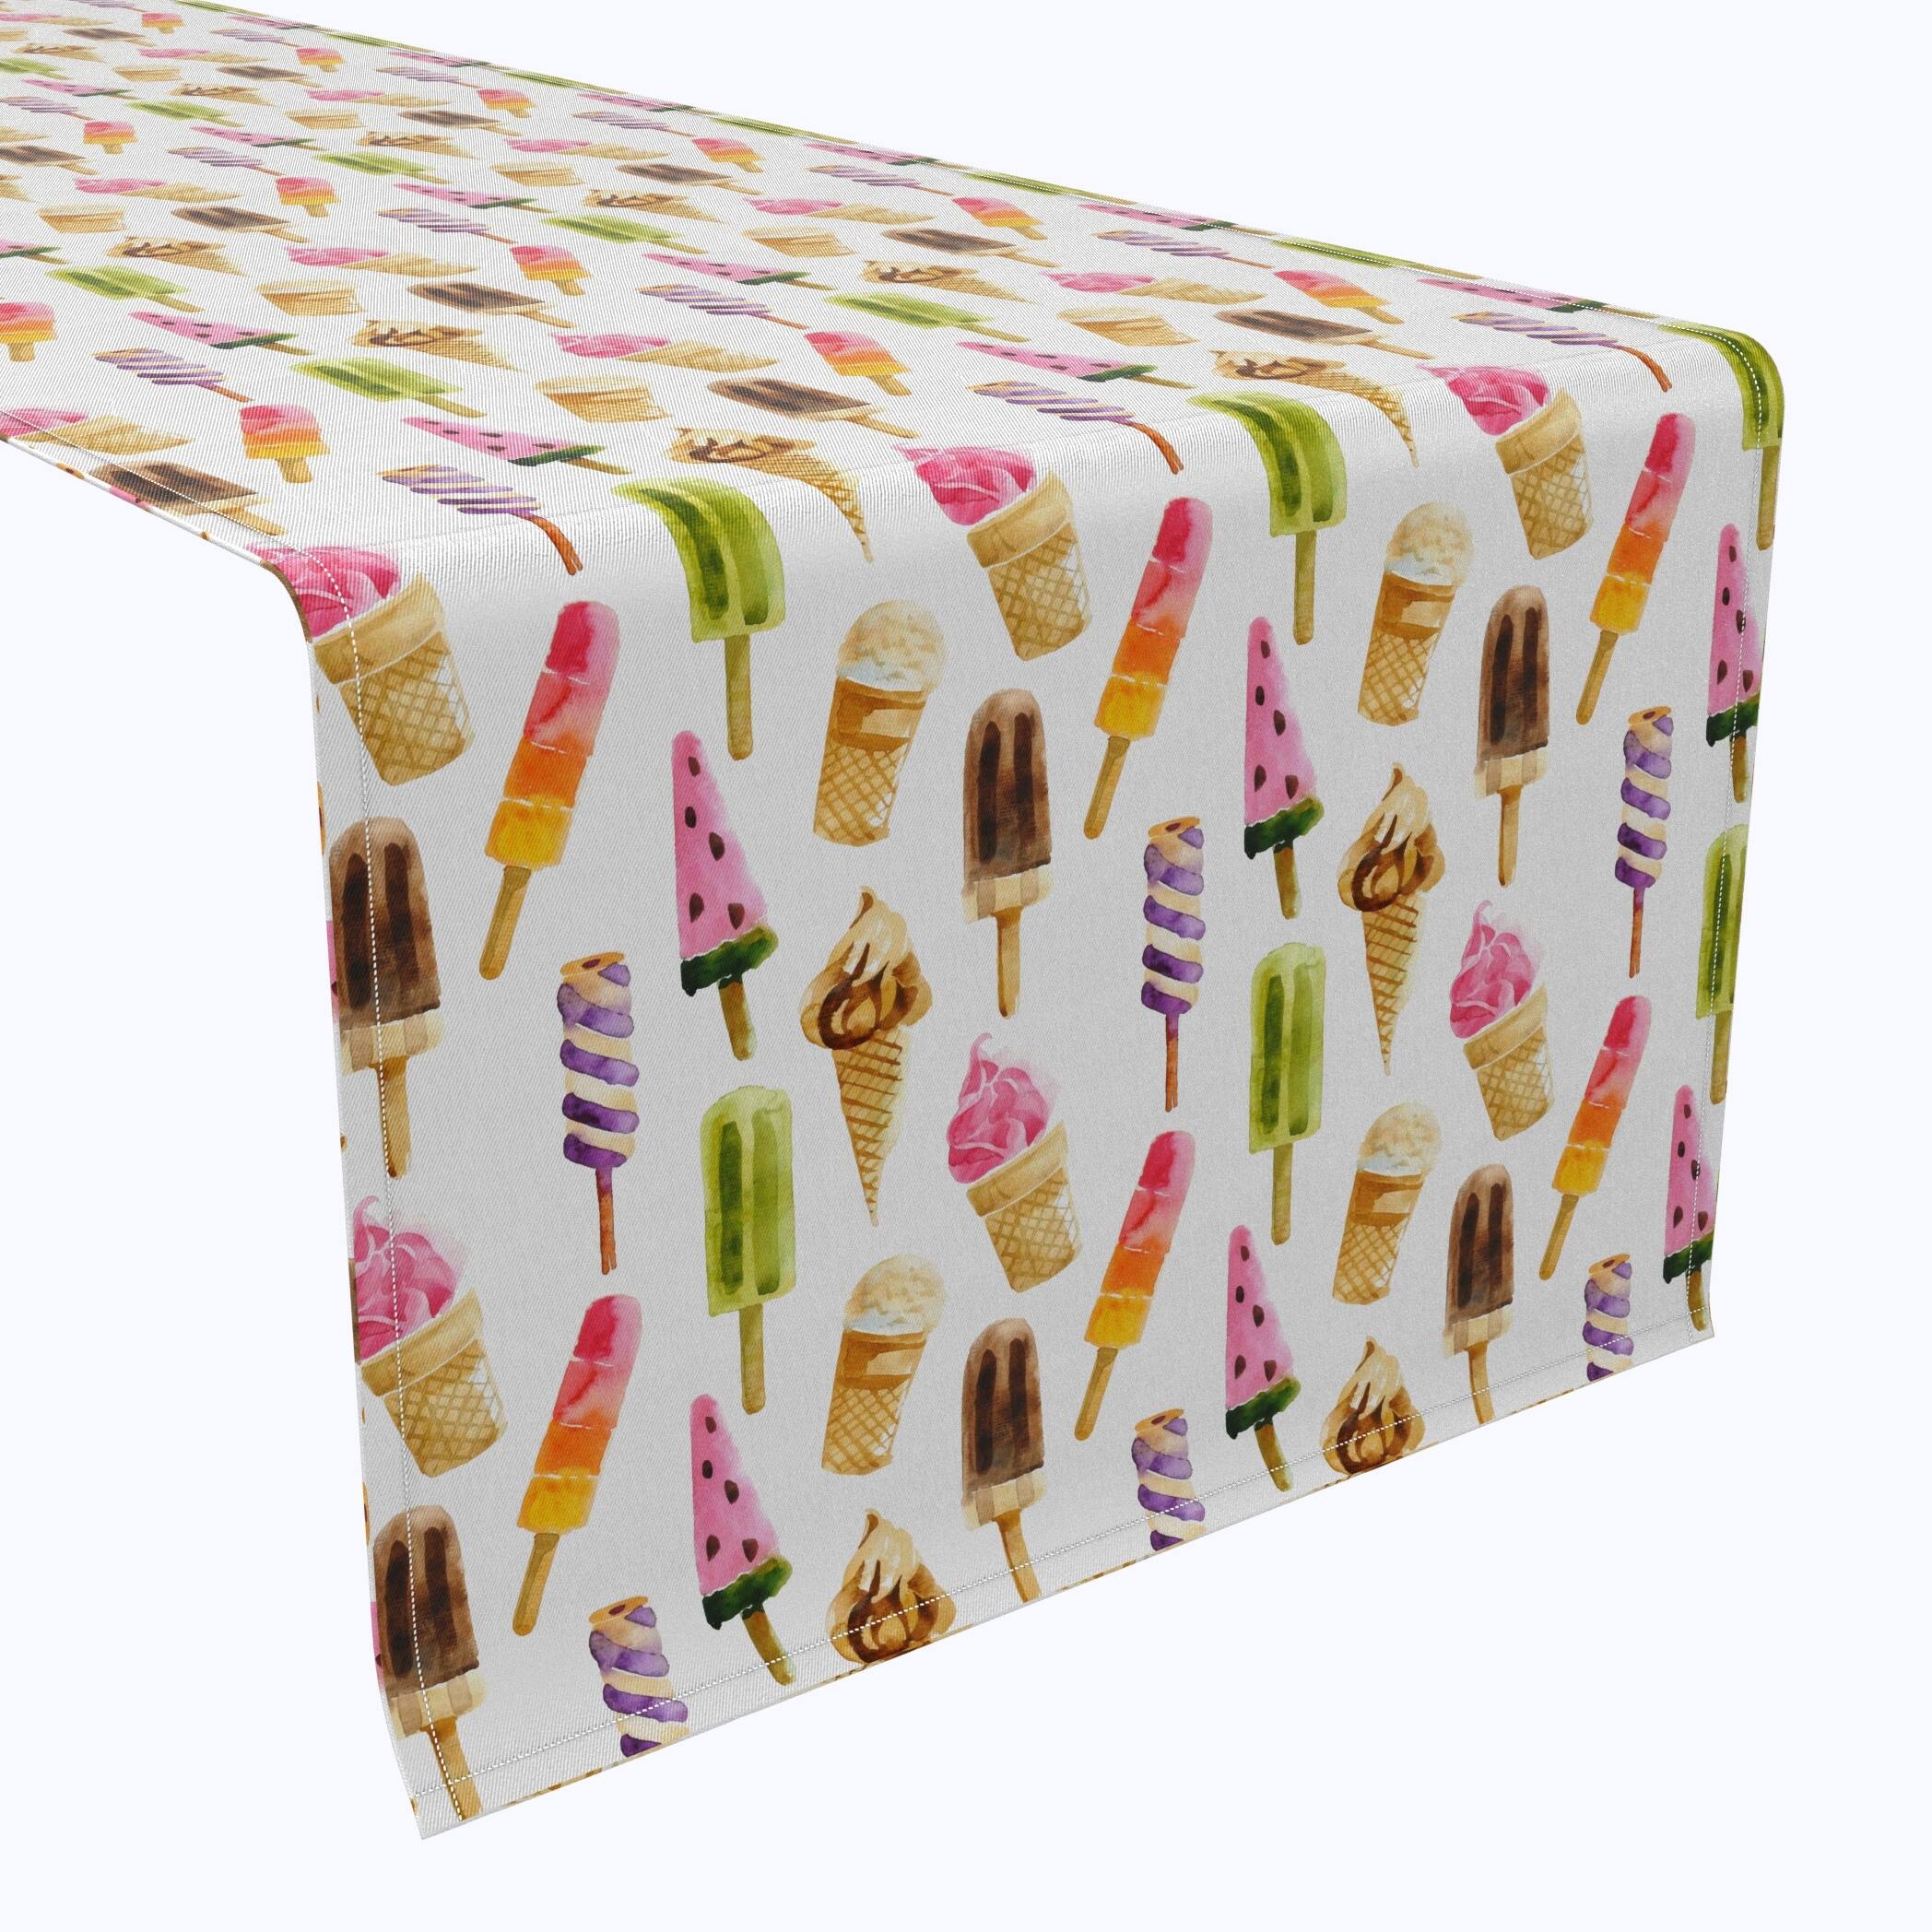 Fabric Textile Products, Inc. Table Runner, 100% Cotton, 16x108", Summer Ice Cream